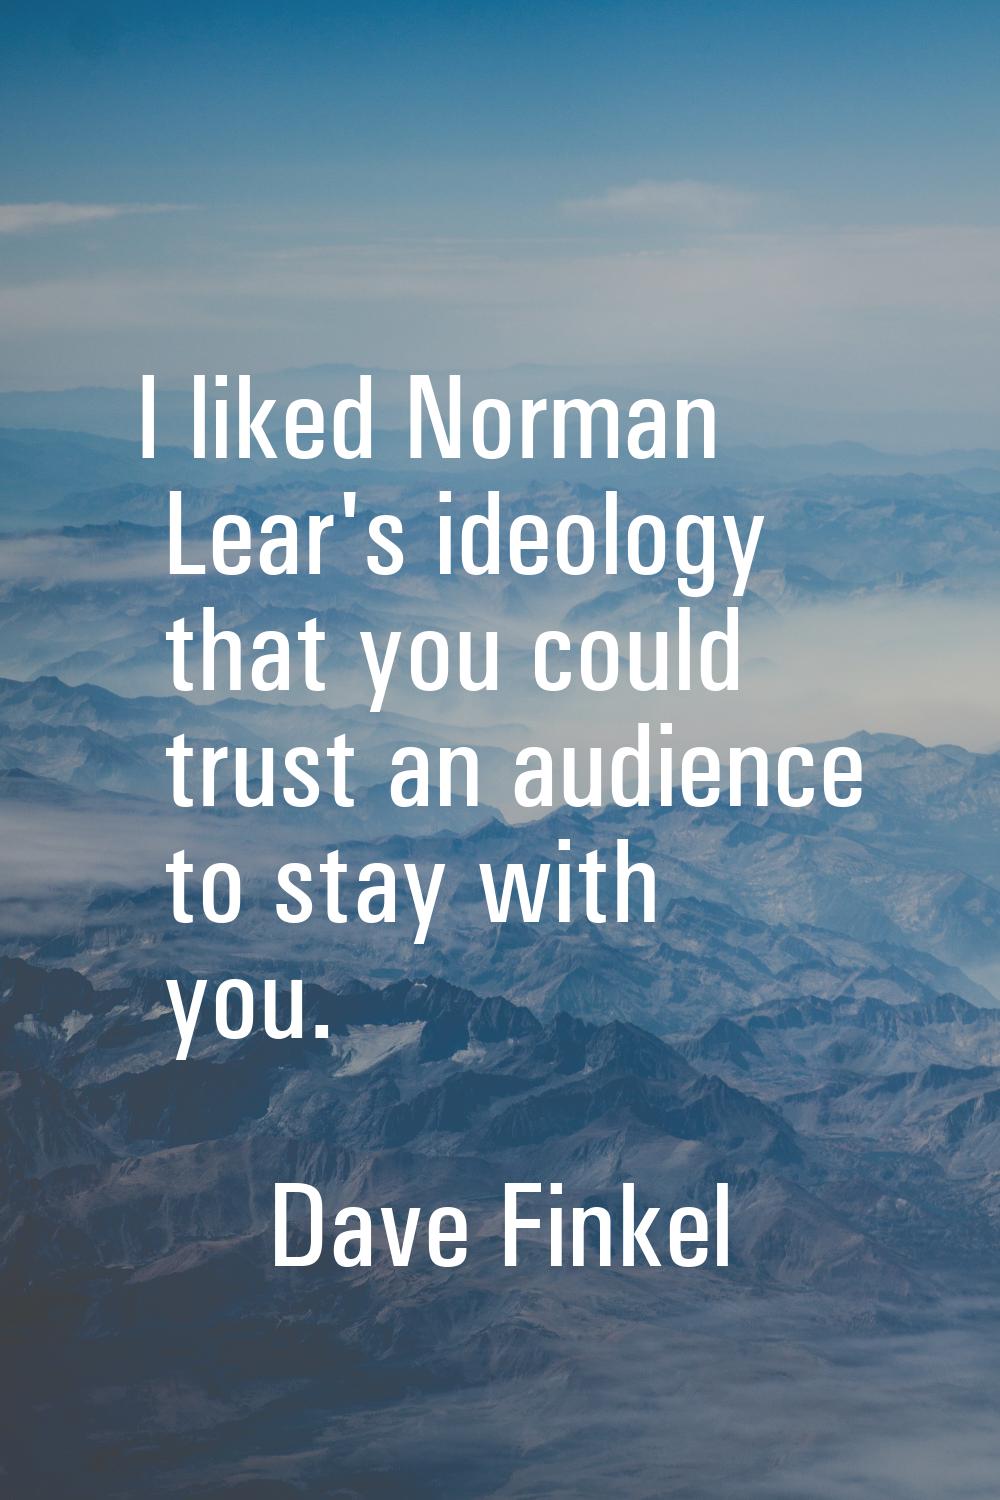 I liked Norman Lear's ideology that you could trust an audience to stay with you.